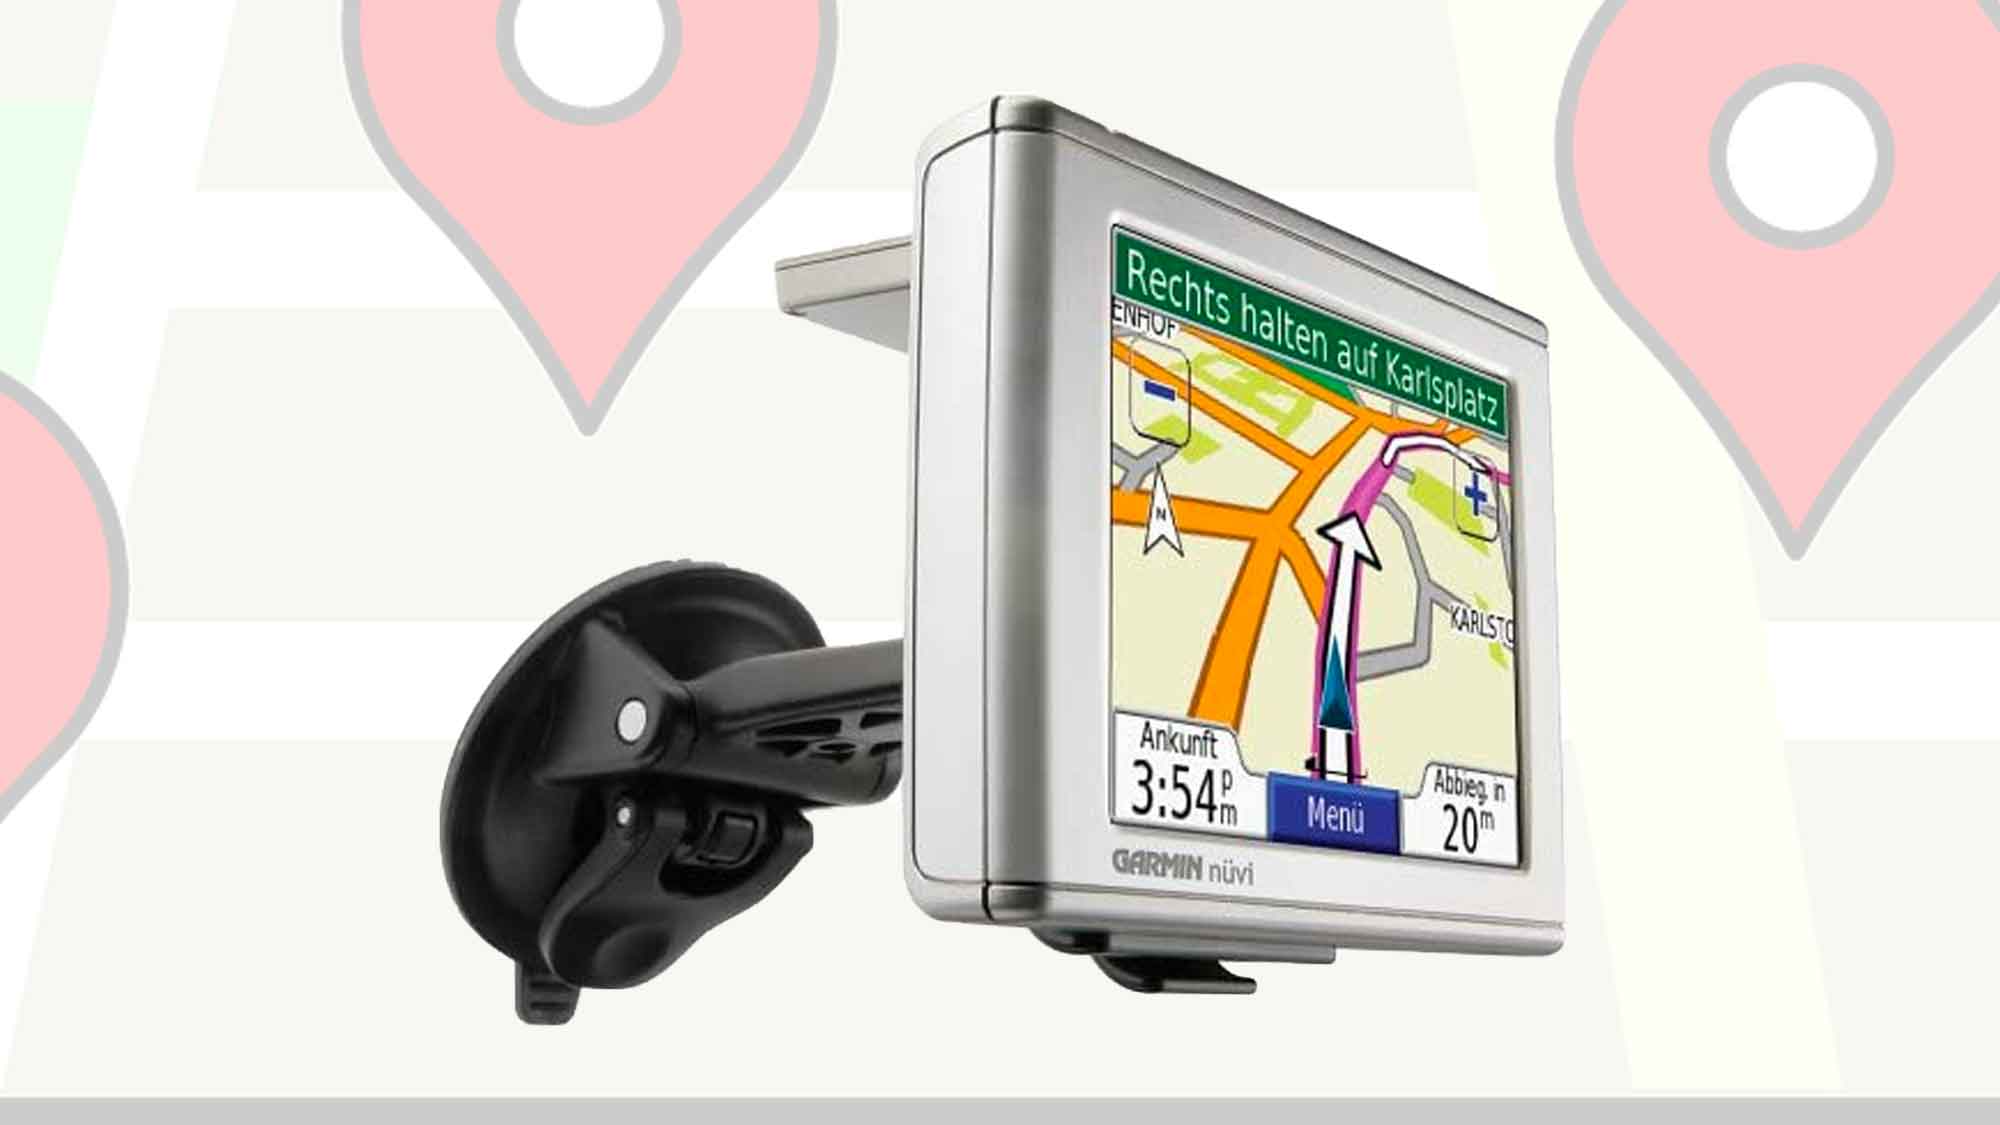 Garmin Offers Minor Mac OS X Support For Their GPS Devices (2007)